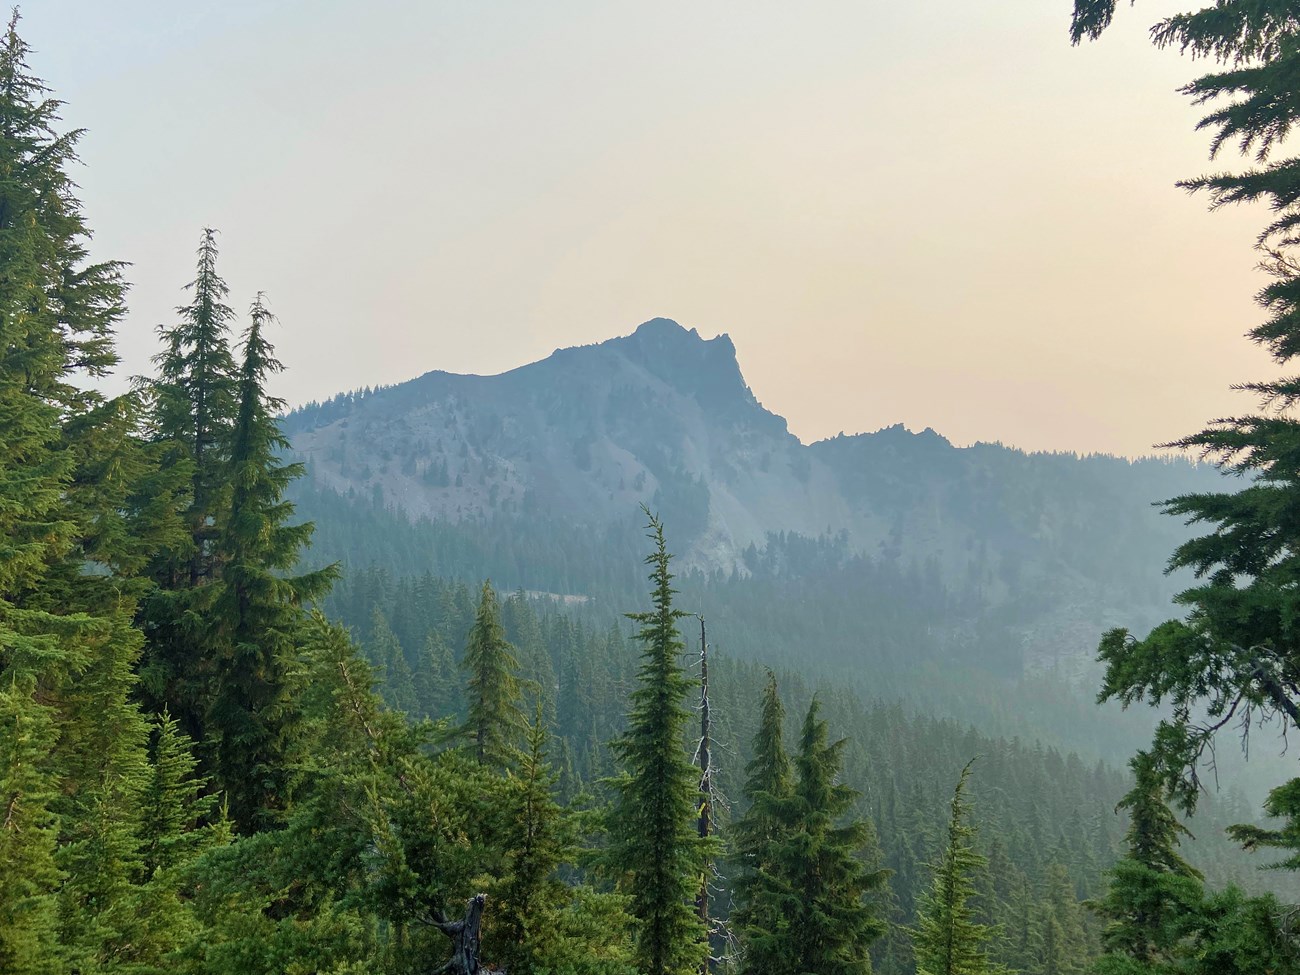 View of a peak shrouded in a thick haze, framed by surrounding conifers.